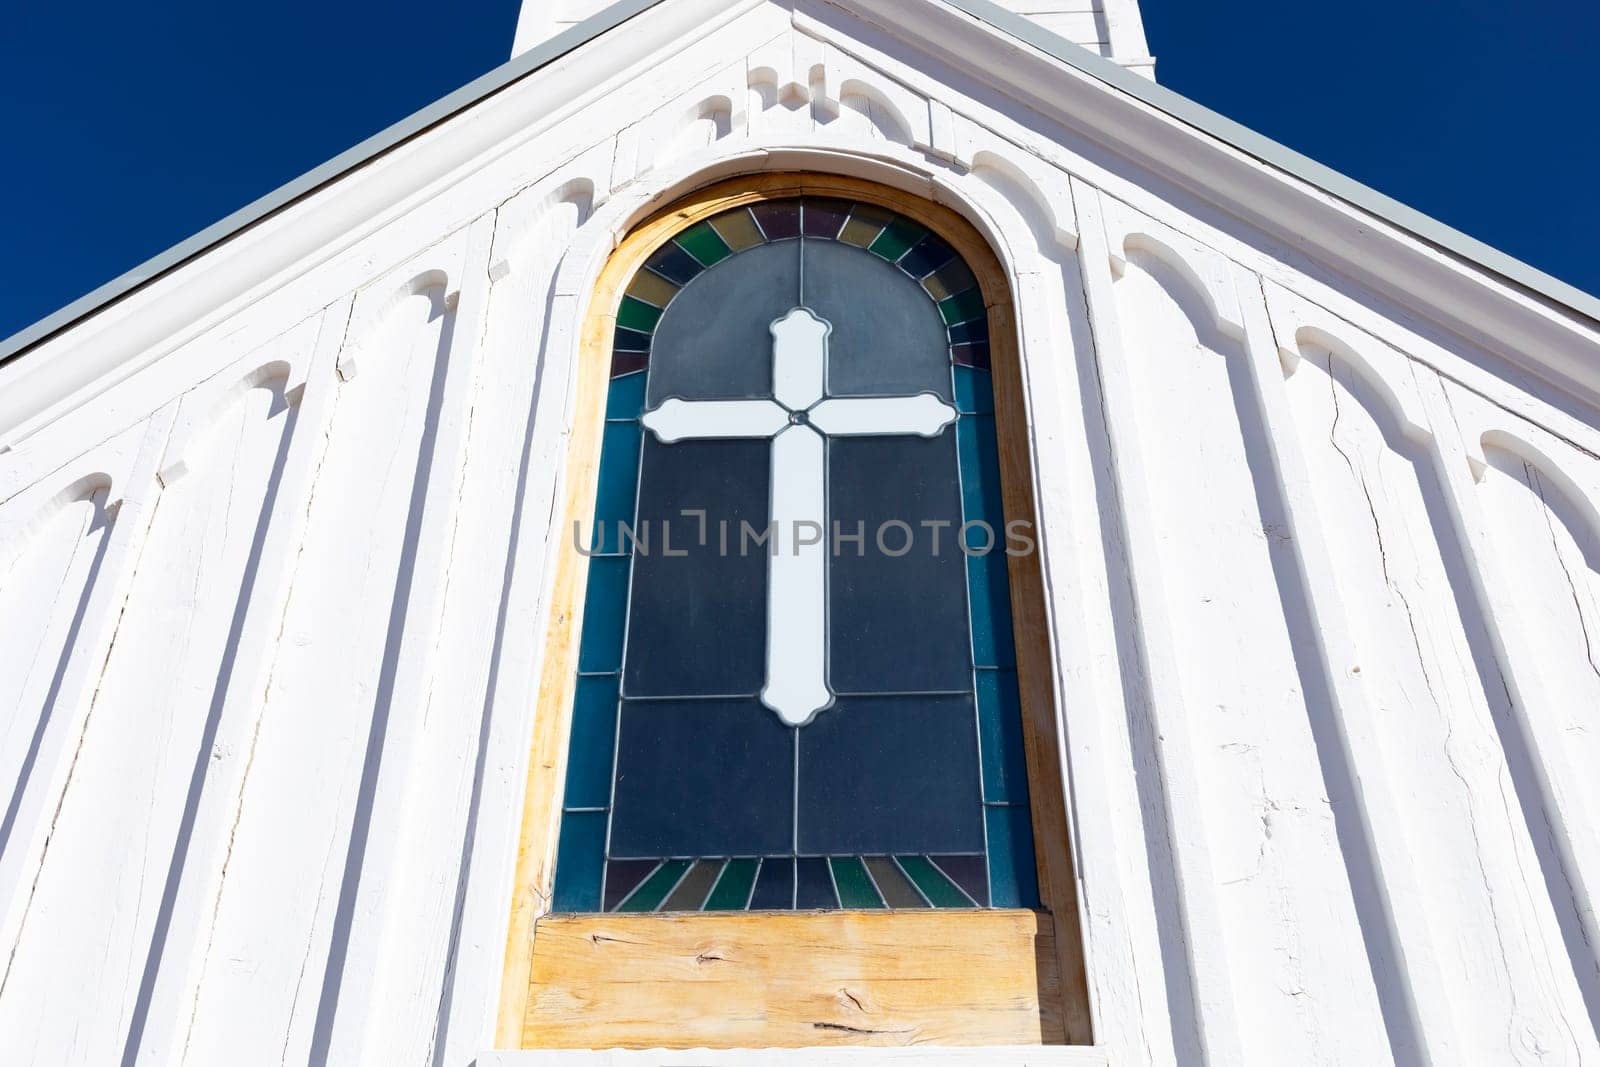 Wooden White Church Stained glass window with Cross, Blue Sky On Background. Christian Religious Holiday Easter or Radonitsa. Horizontal Plane. High quality photo